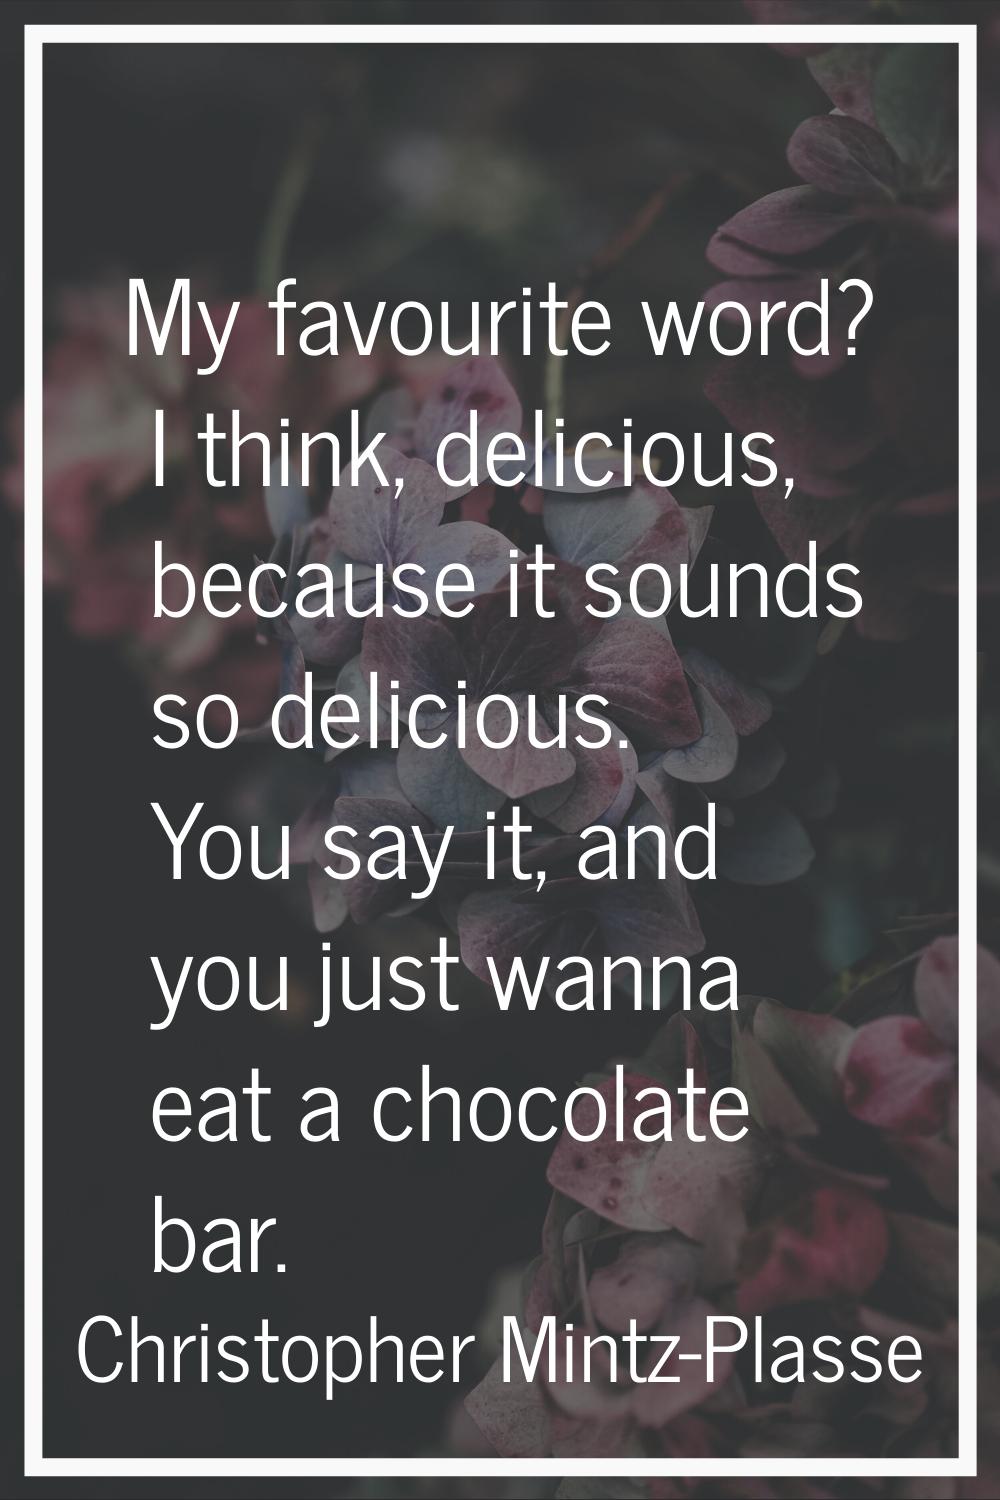 My favourite word? I think, delicious, because it sounds so delicious. You say it, and you just wan